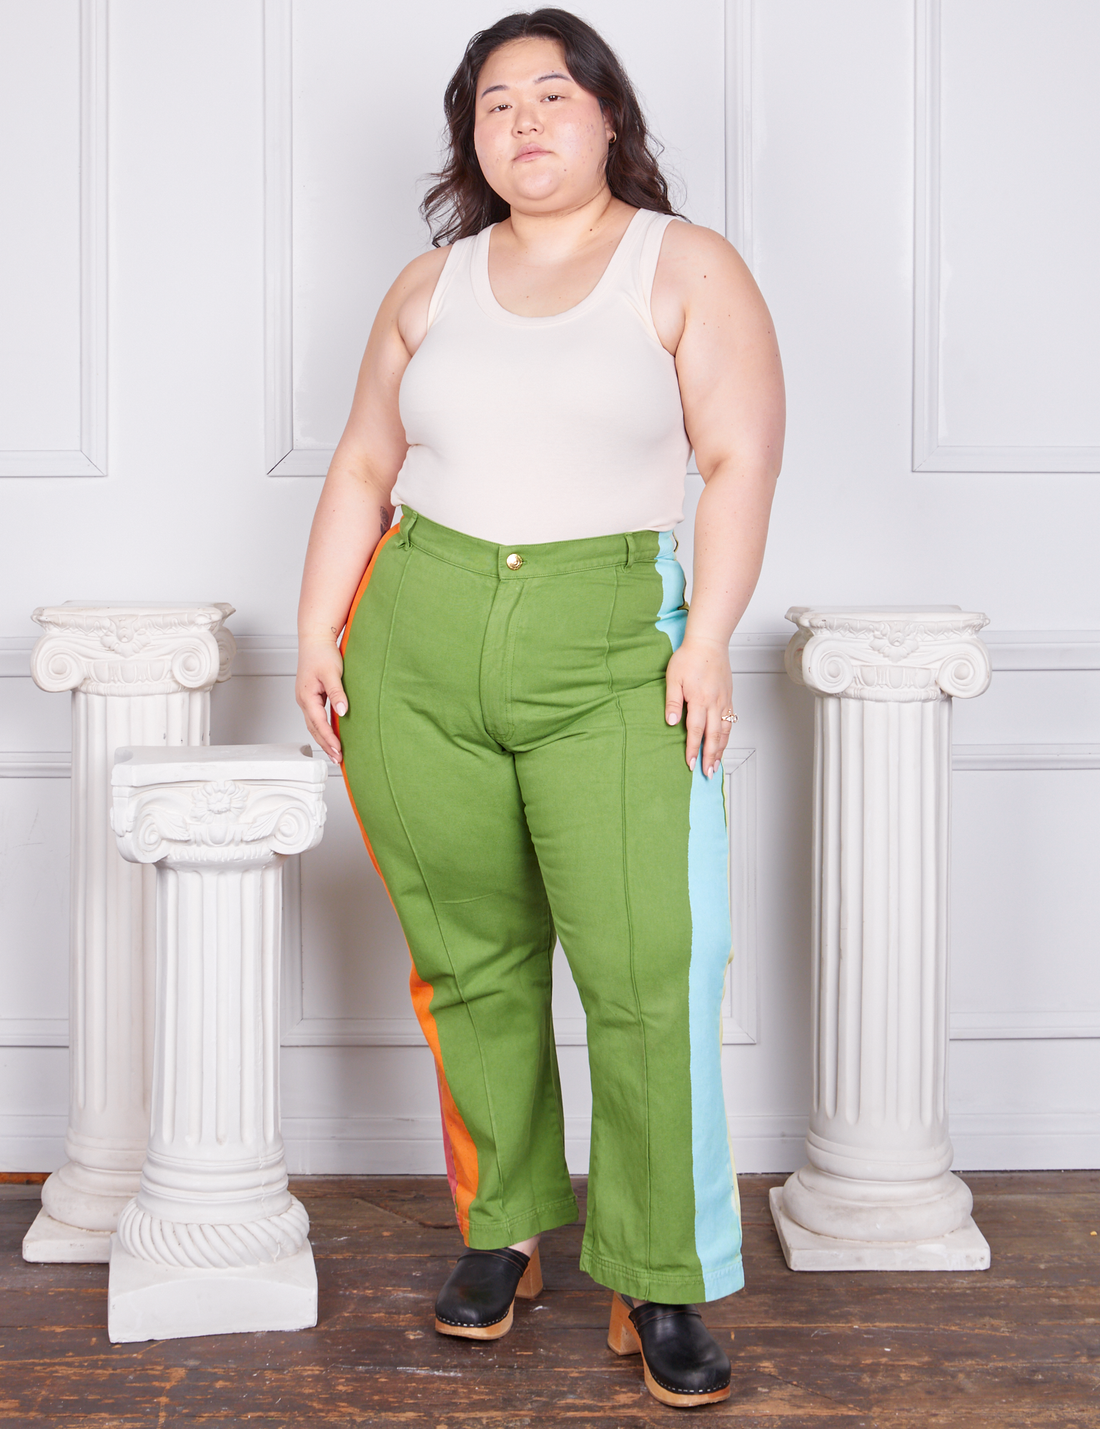 Ashley is wearing Hand-Painted Stripe Western Pants in Bright Olive and a vintage off-white Tank Top